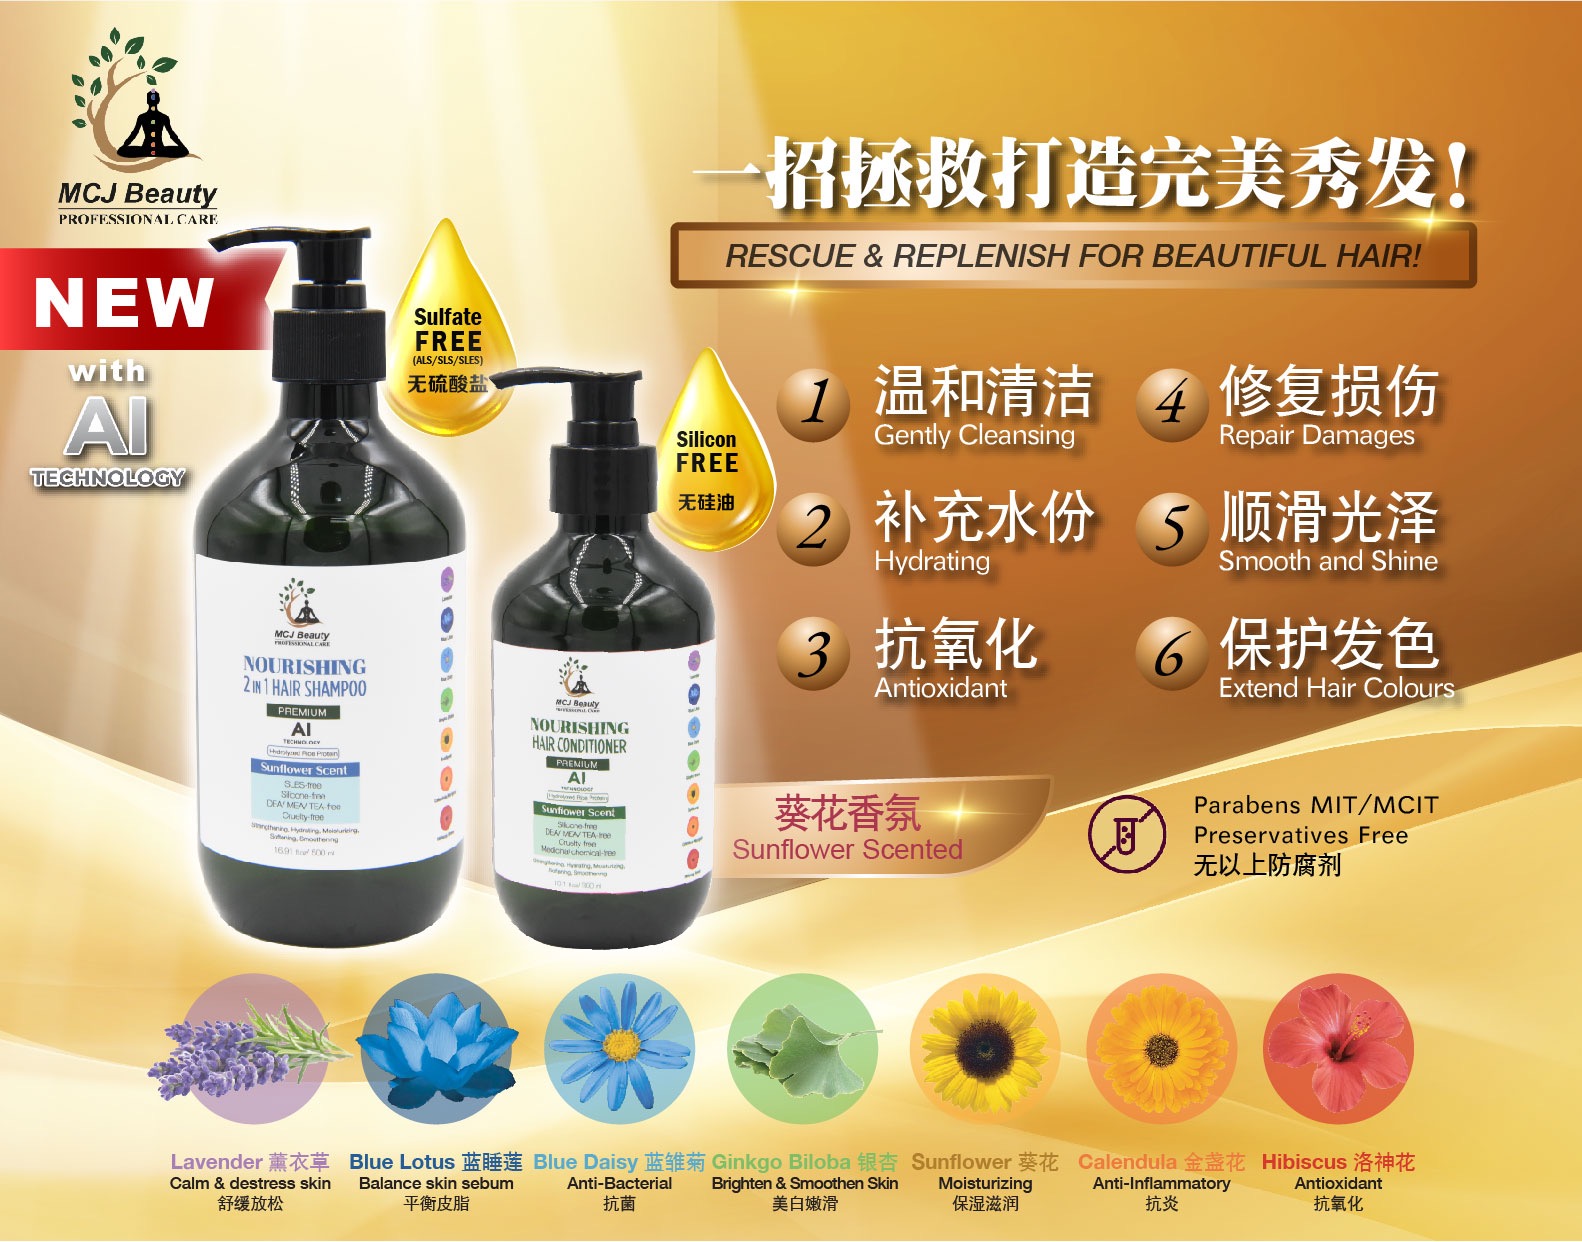 MCJ BEAUTY NOURISHING 2 IN 1 HAIR SHAMPOO  (SUNFLOWER SCENT) 500ML IMPROVED WITH AI TECHNOLOGY